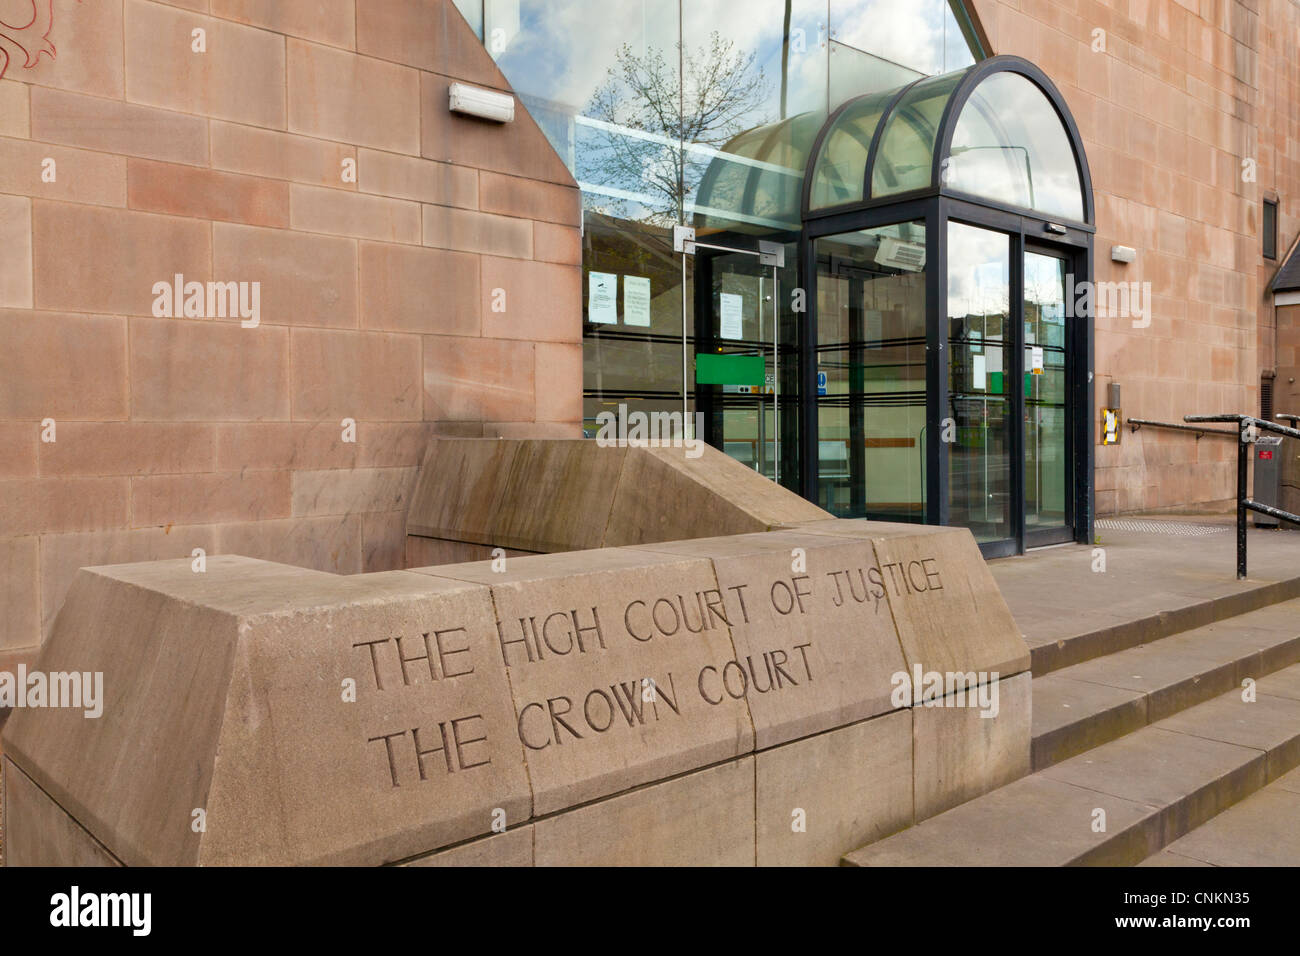 Nottingham Crown Court, High Court of Justice, County Court and Family Court Hearing Centre, Nottingham, England, UK Stock Photo